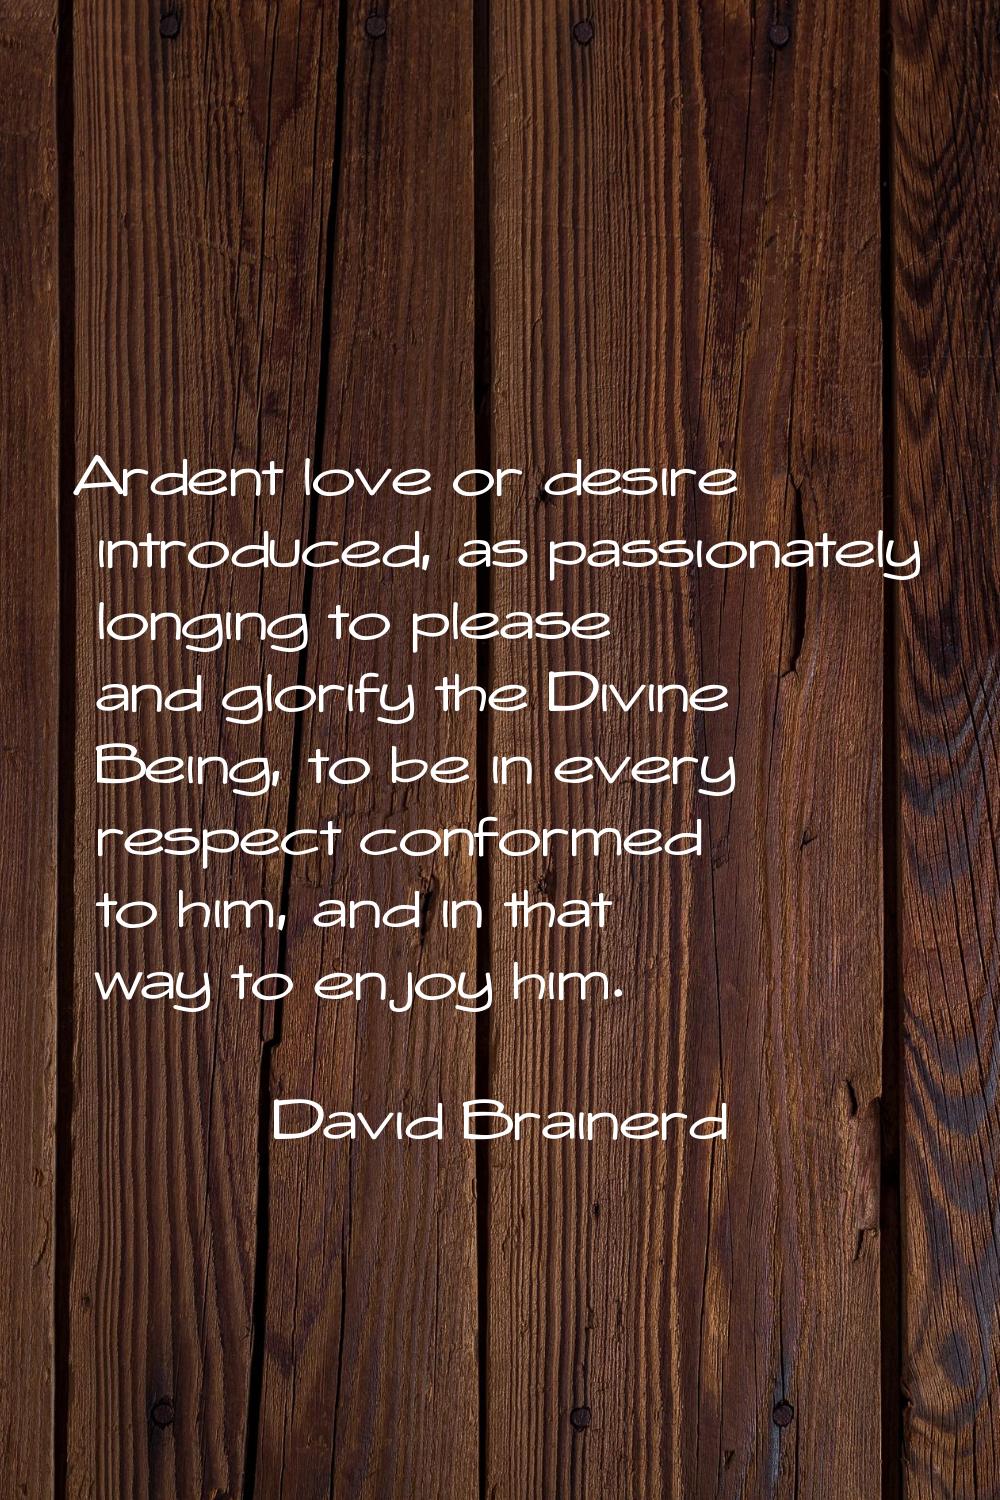 Ardent love or desire introduced, as passionately longing to please and glorify the Divine Being, t